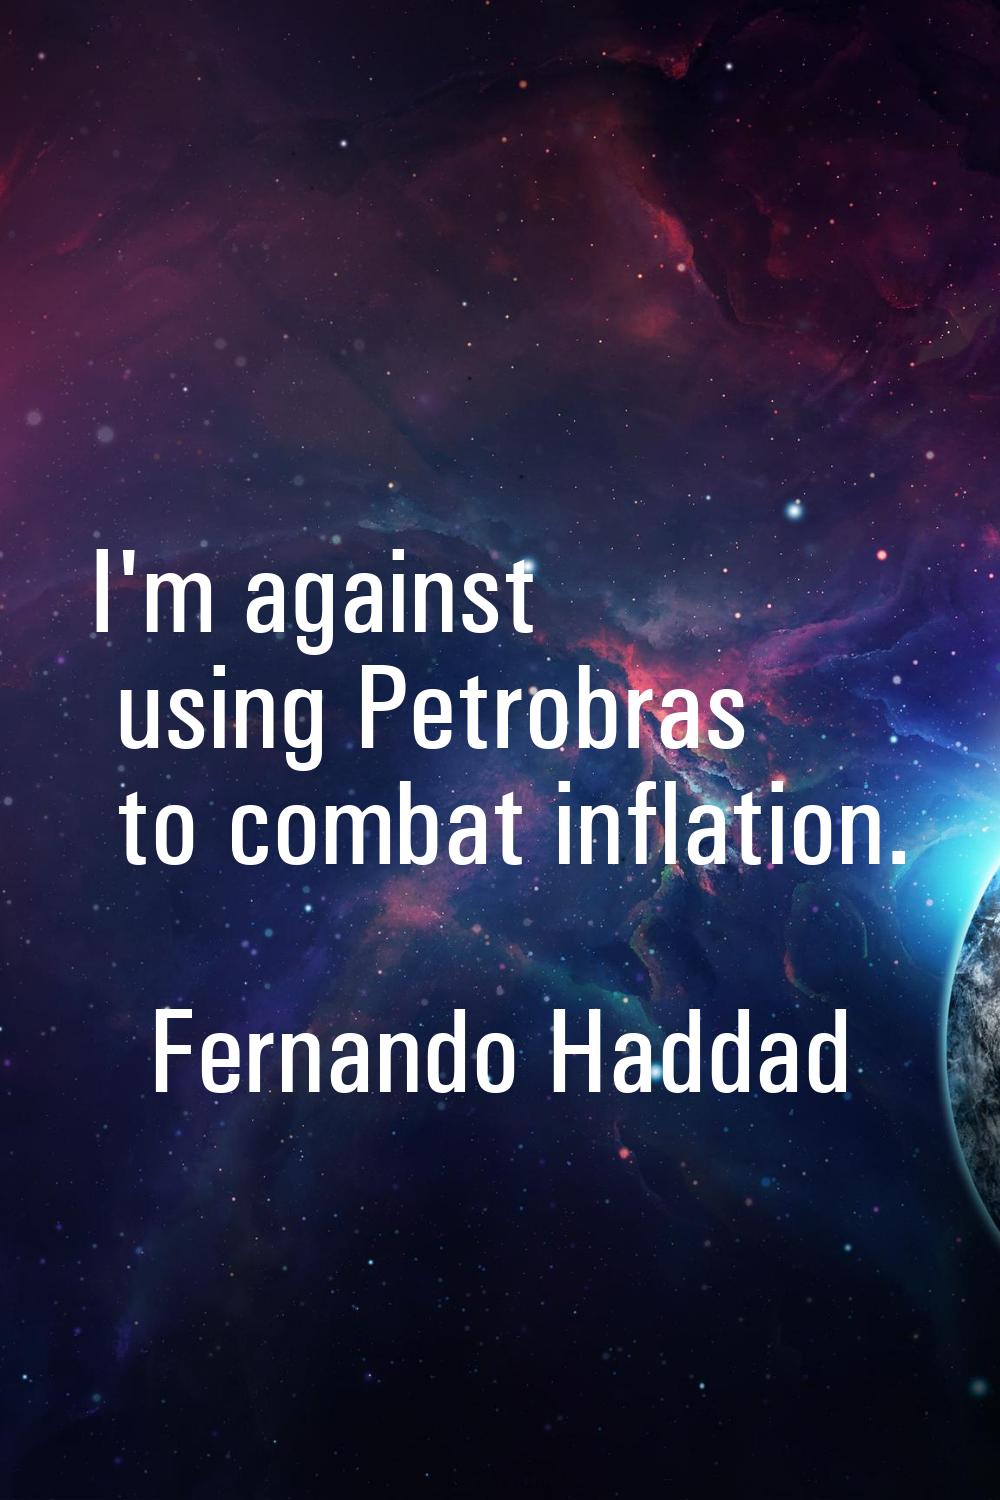 I'm against using Petrobras to combat inflation.